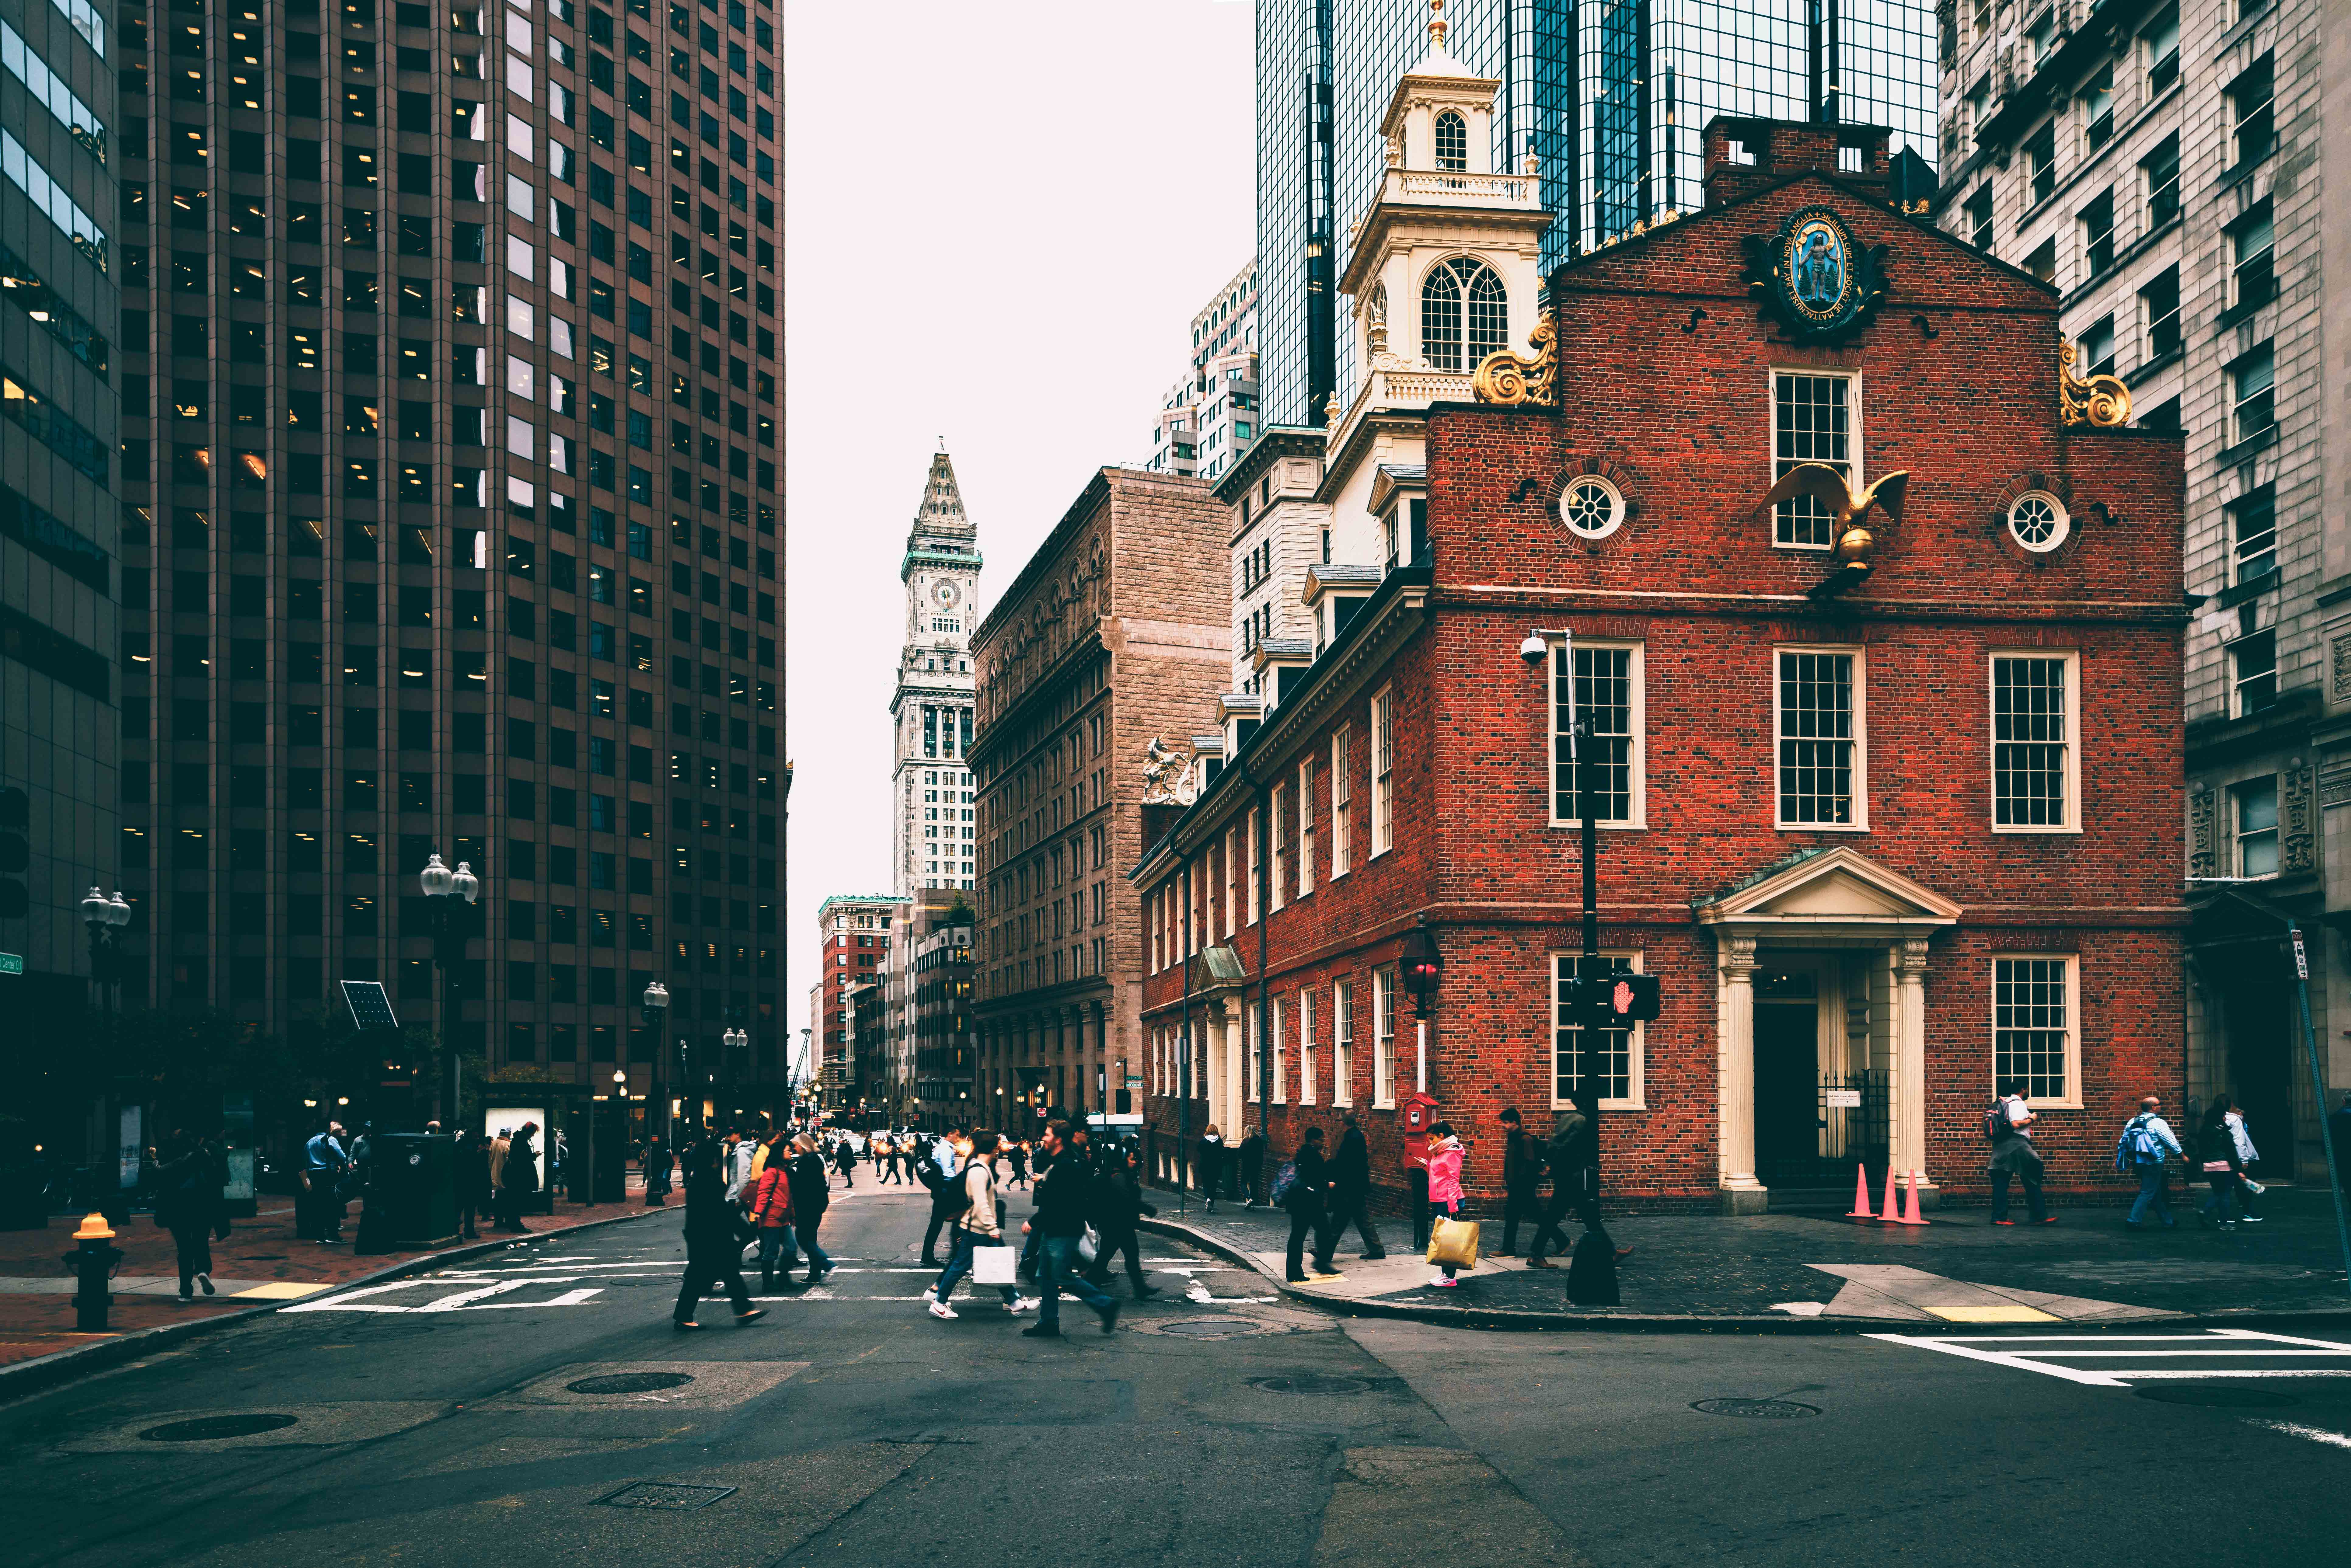 Iconic Old State House in Boston Massachusetts.